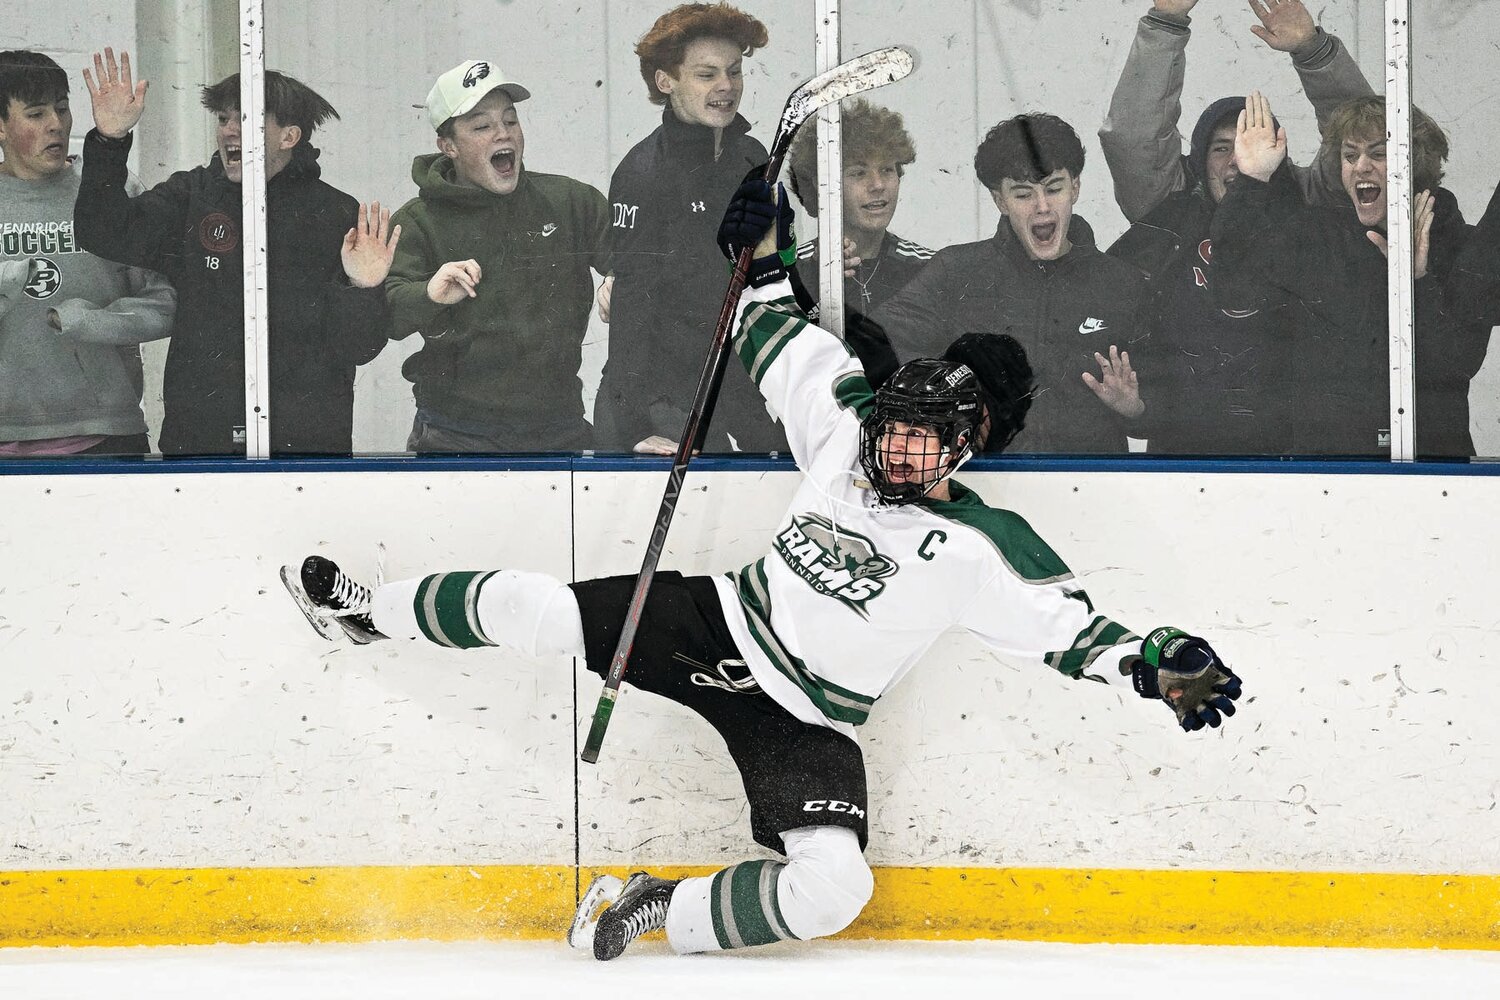 Pennridge captain Colin Dachowski slides into the boards after tying the game at 1-1 in the first period.